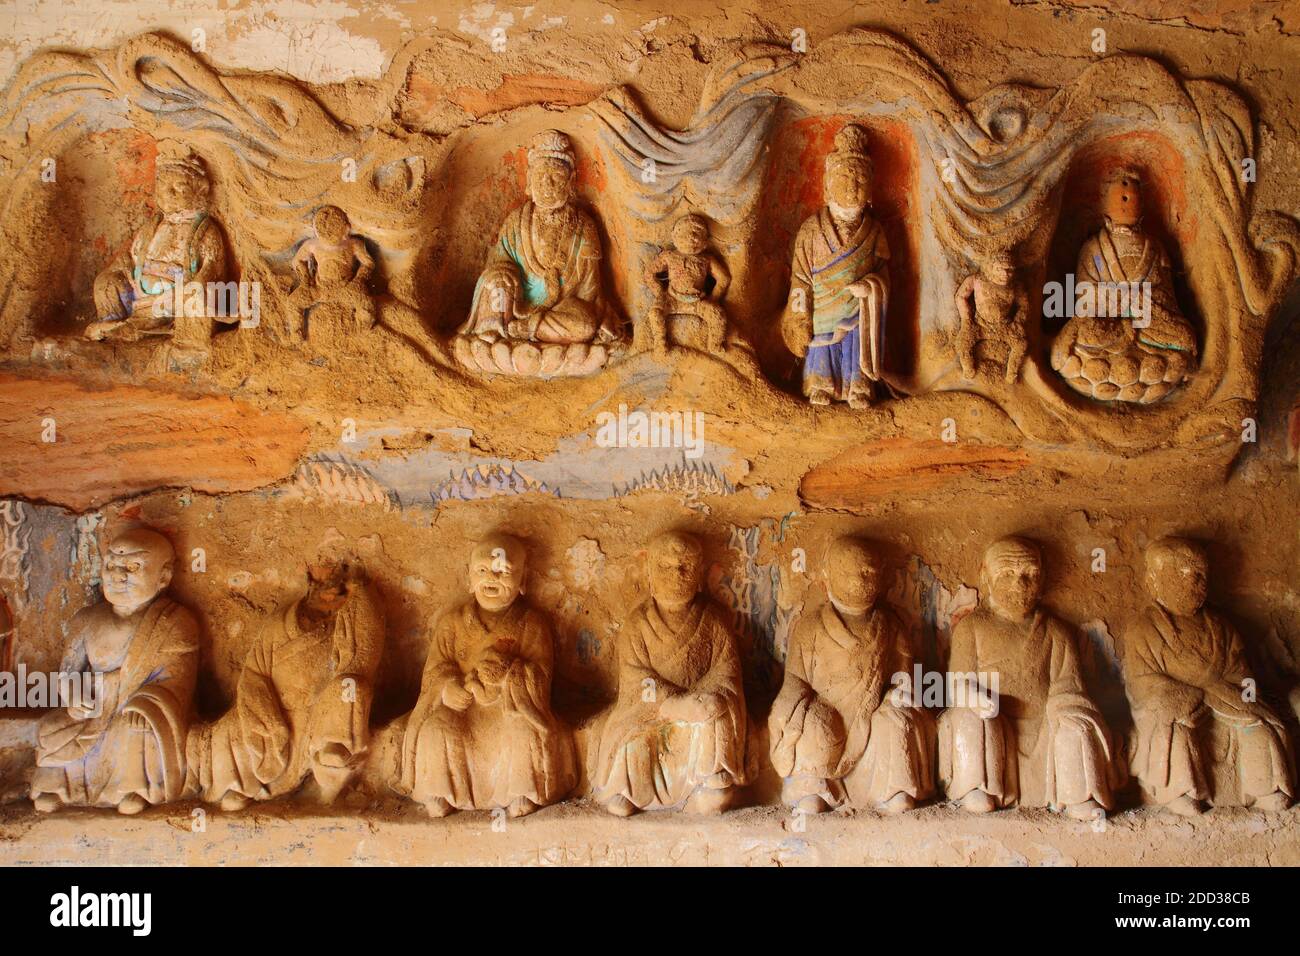 Jingchuan county in gansu province south cave temple Stock Photo